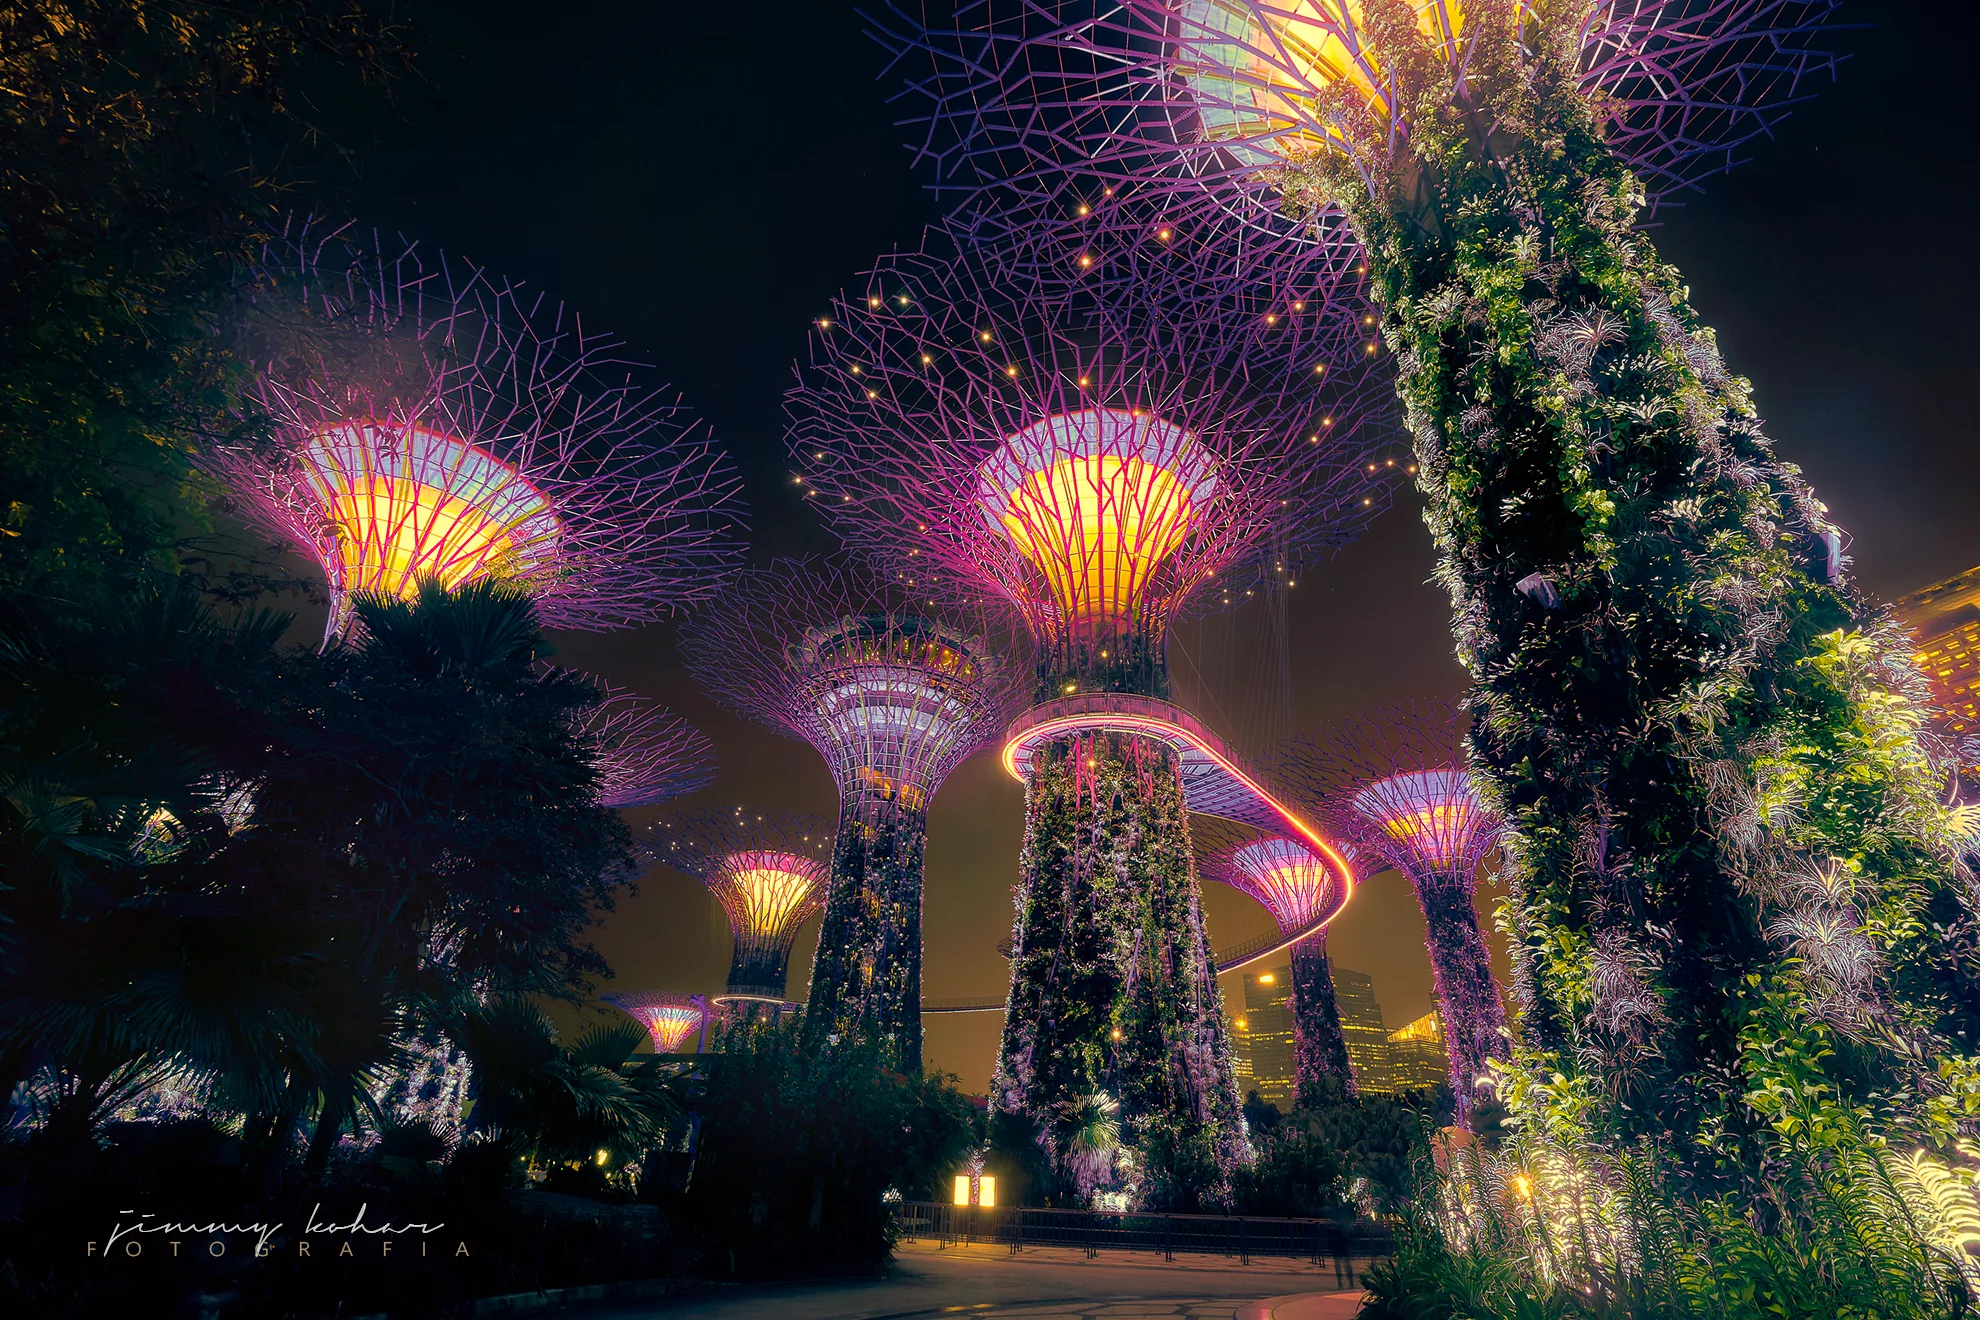 Supertree Grove, Gardens by the bay, Singapore